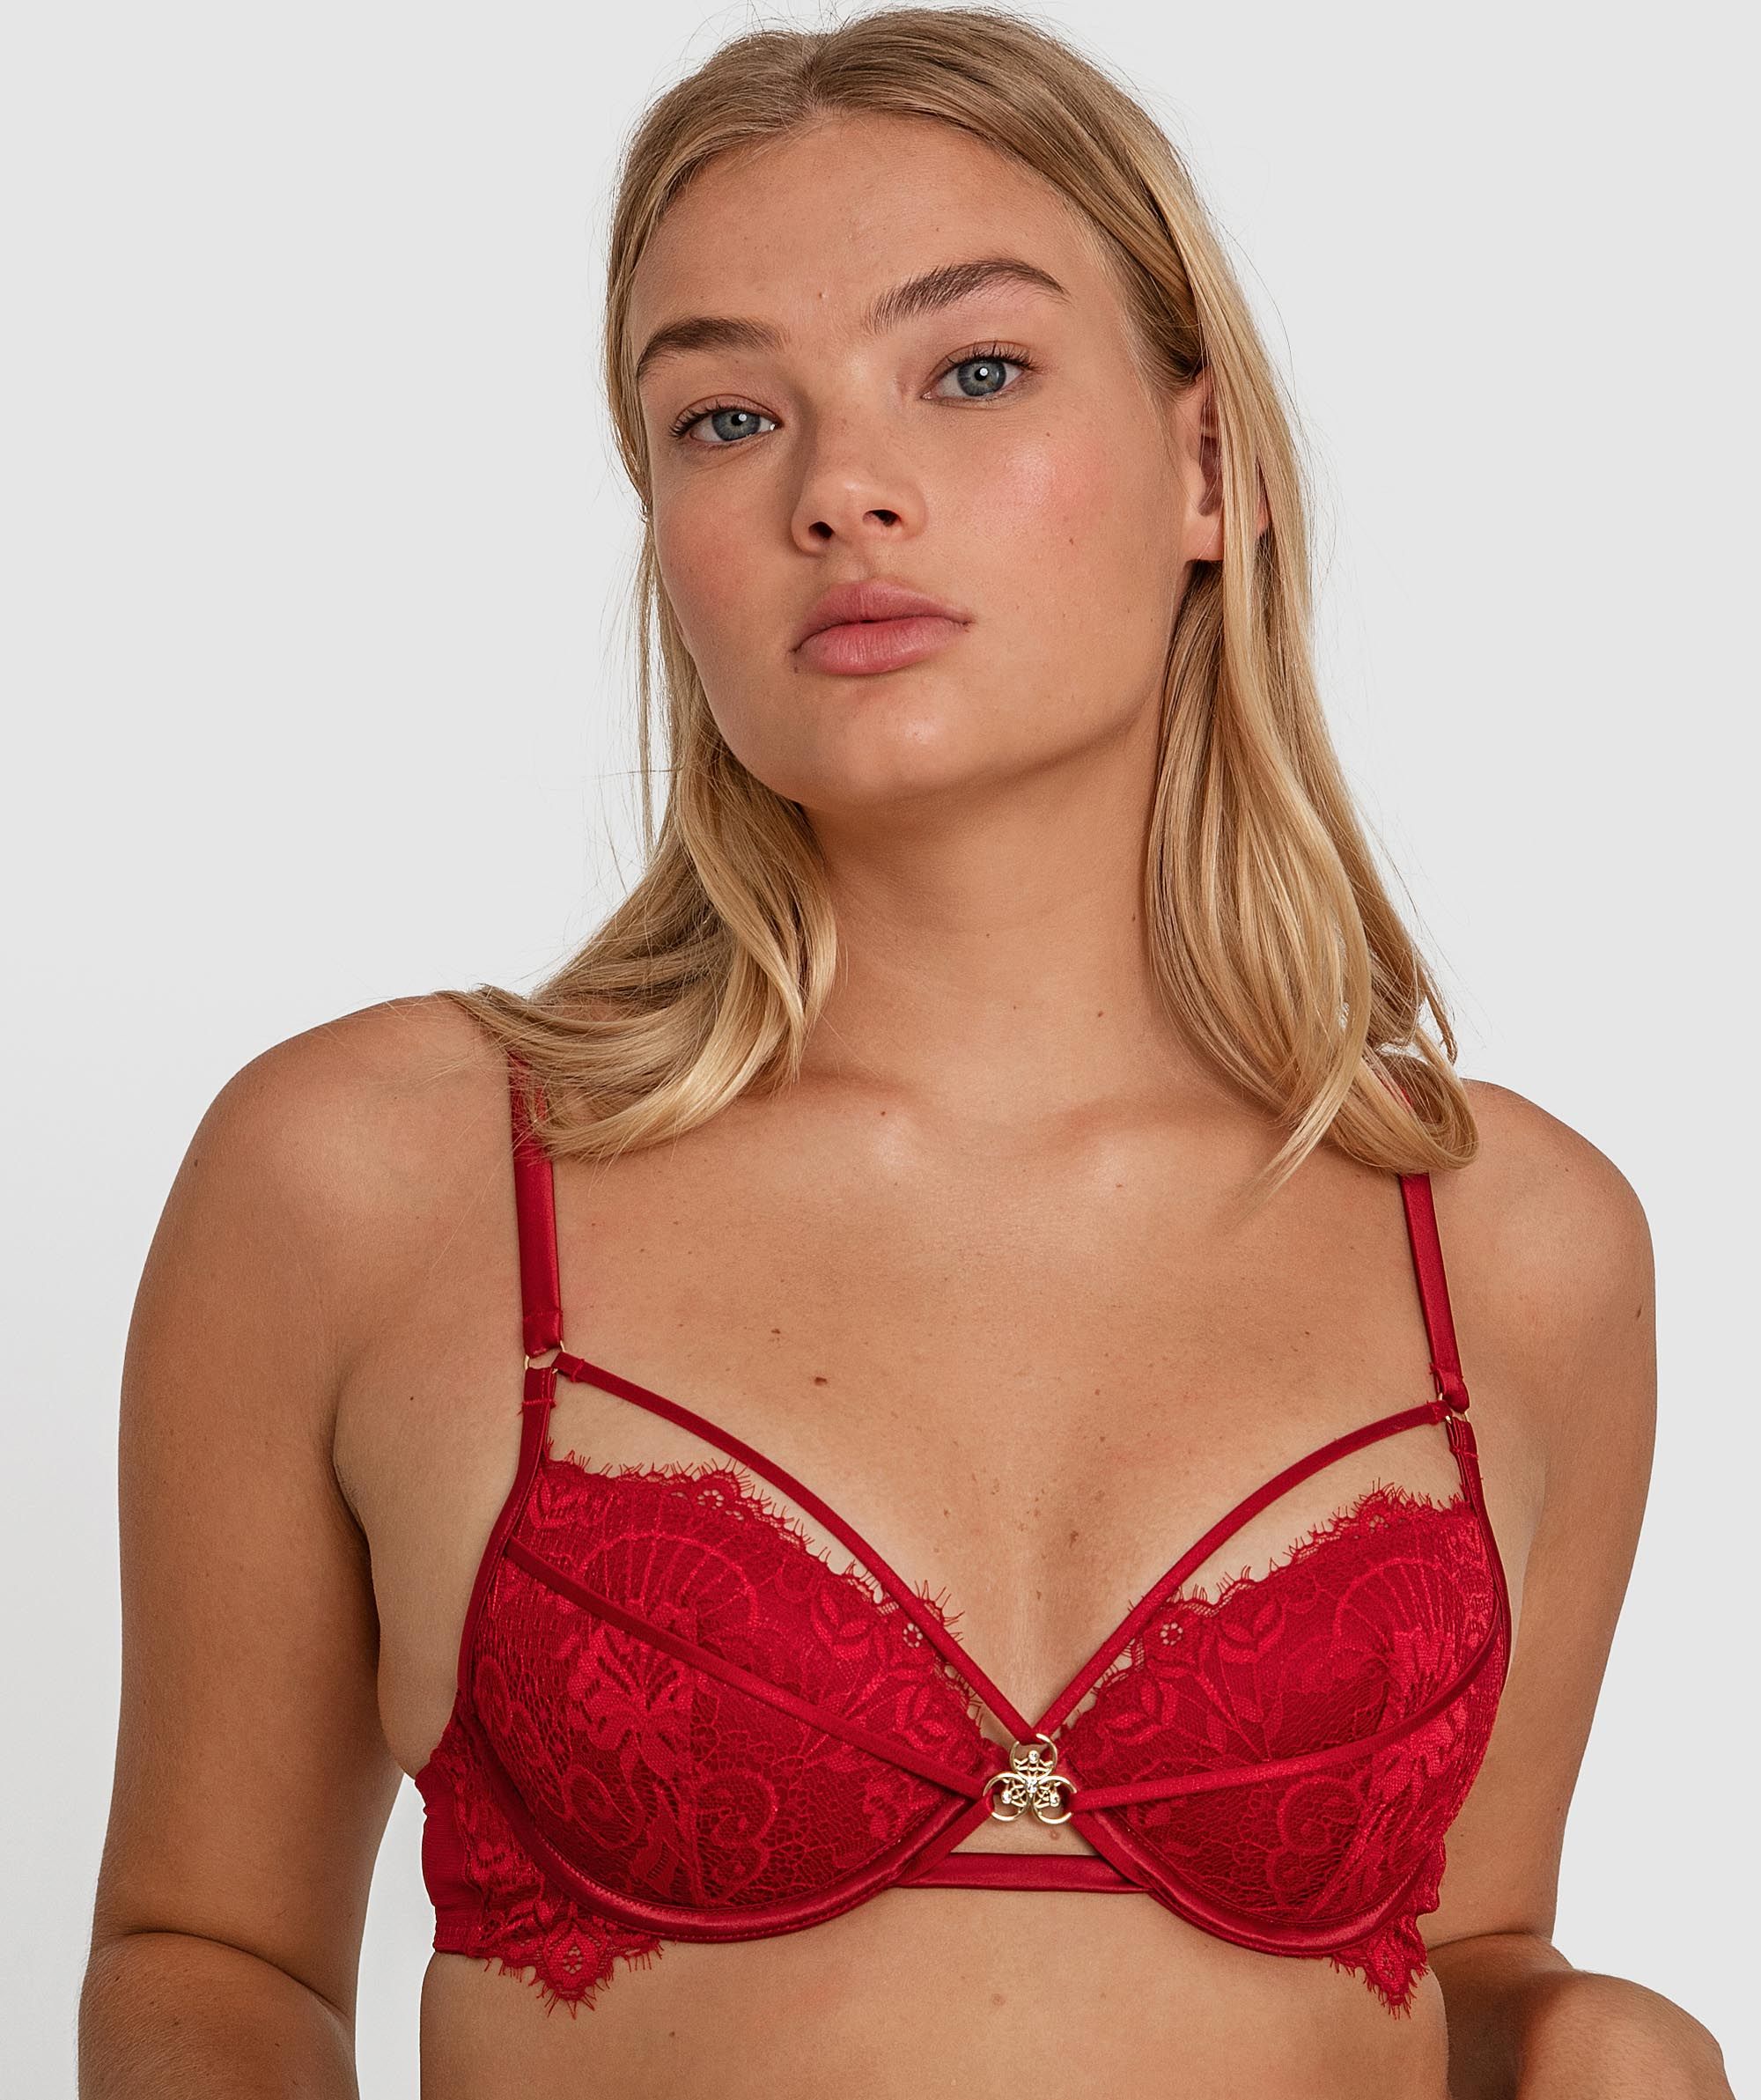 Keep it red, keep it bold! Grab this Tomato Red bra now -  .co.in/product.aspx?id=356%20&utm_medium=content&utm_source=pinterest.com&utm_campaig…